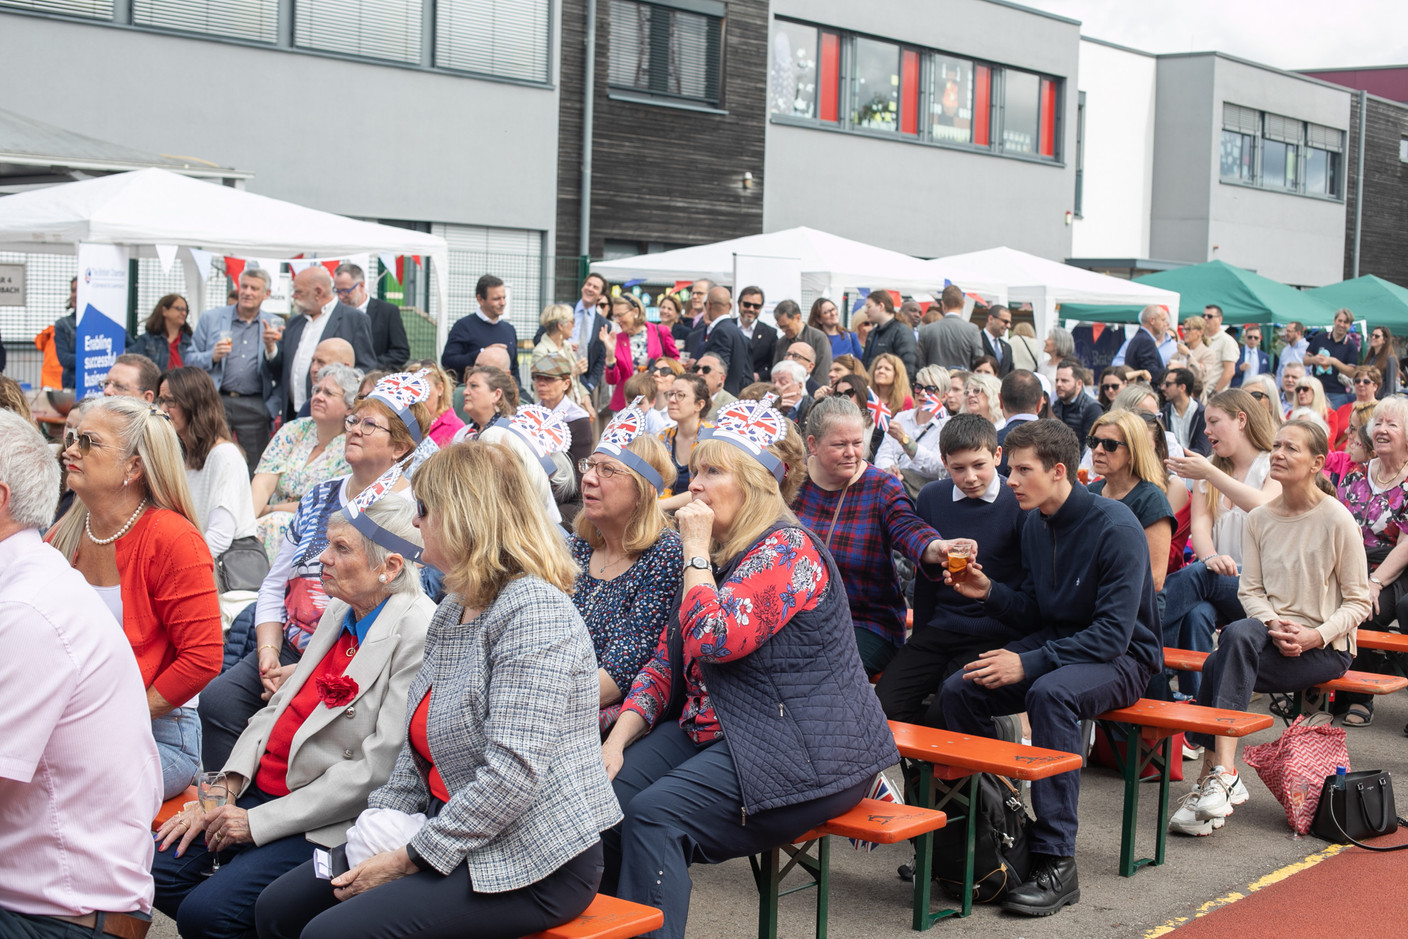 People attending an event at St George’s International School in Luxembourg on 6 May 2023 to celebrate the coronation of King Charles III and Queen Camilla shown on big screens (not shown). Photo: Matic Zorman / Maison Moderne